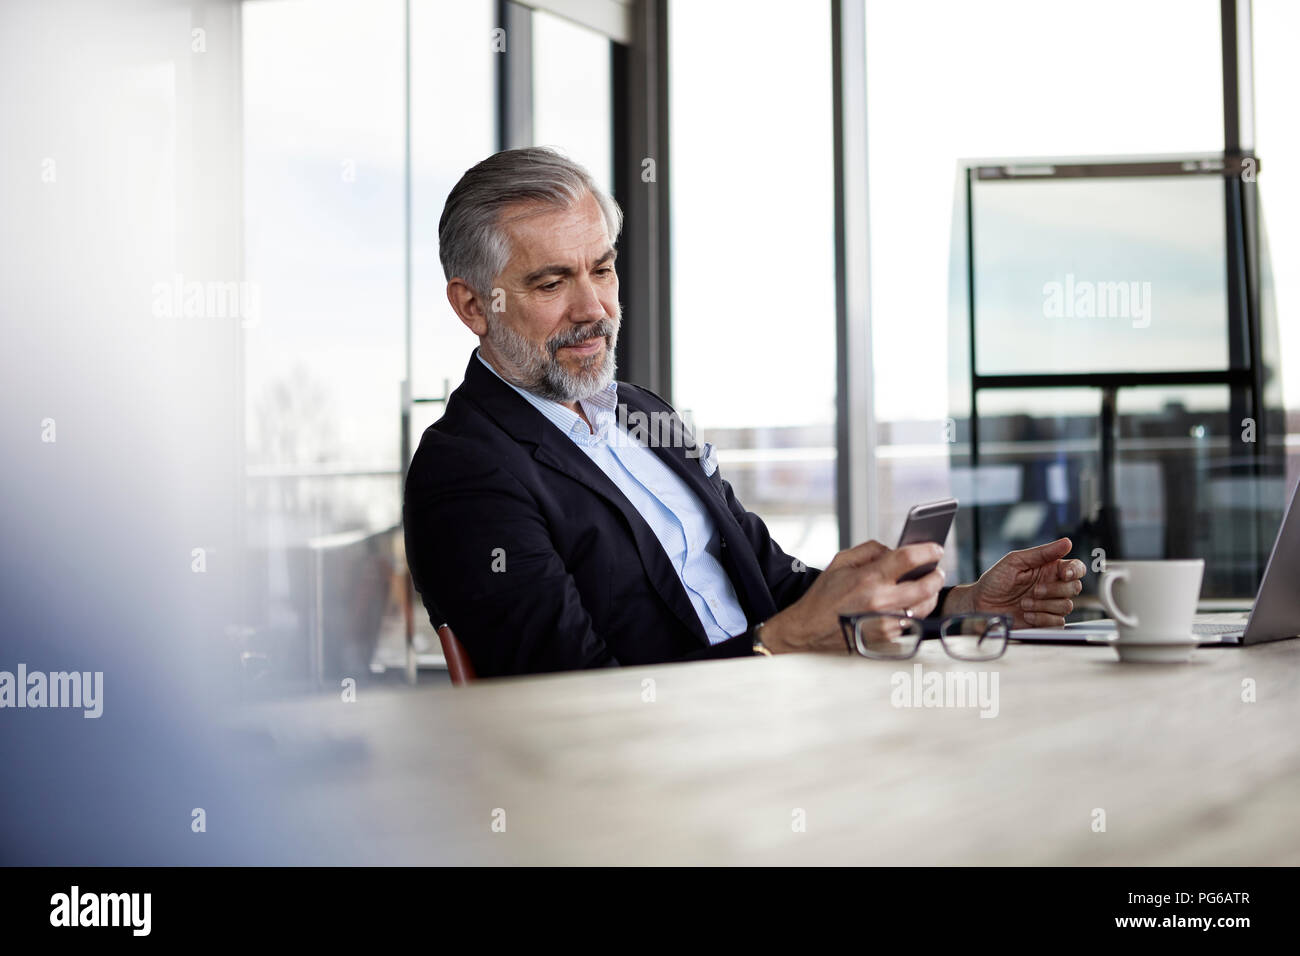 Businessman using cell pohone at desk in office Banque D'Images